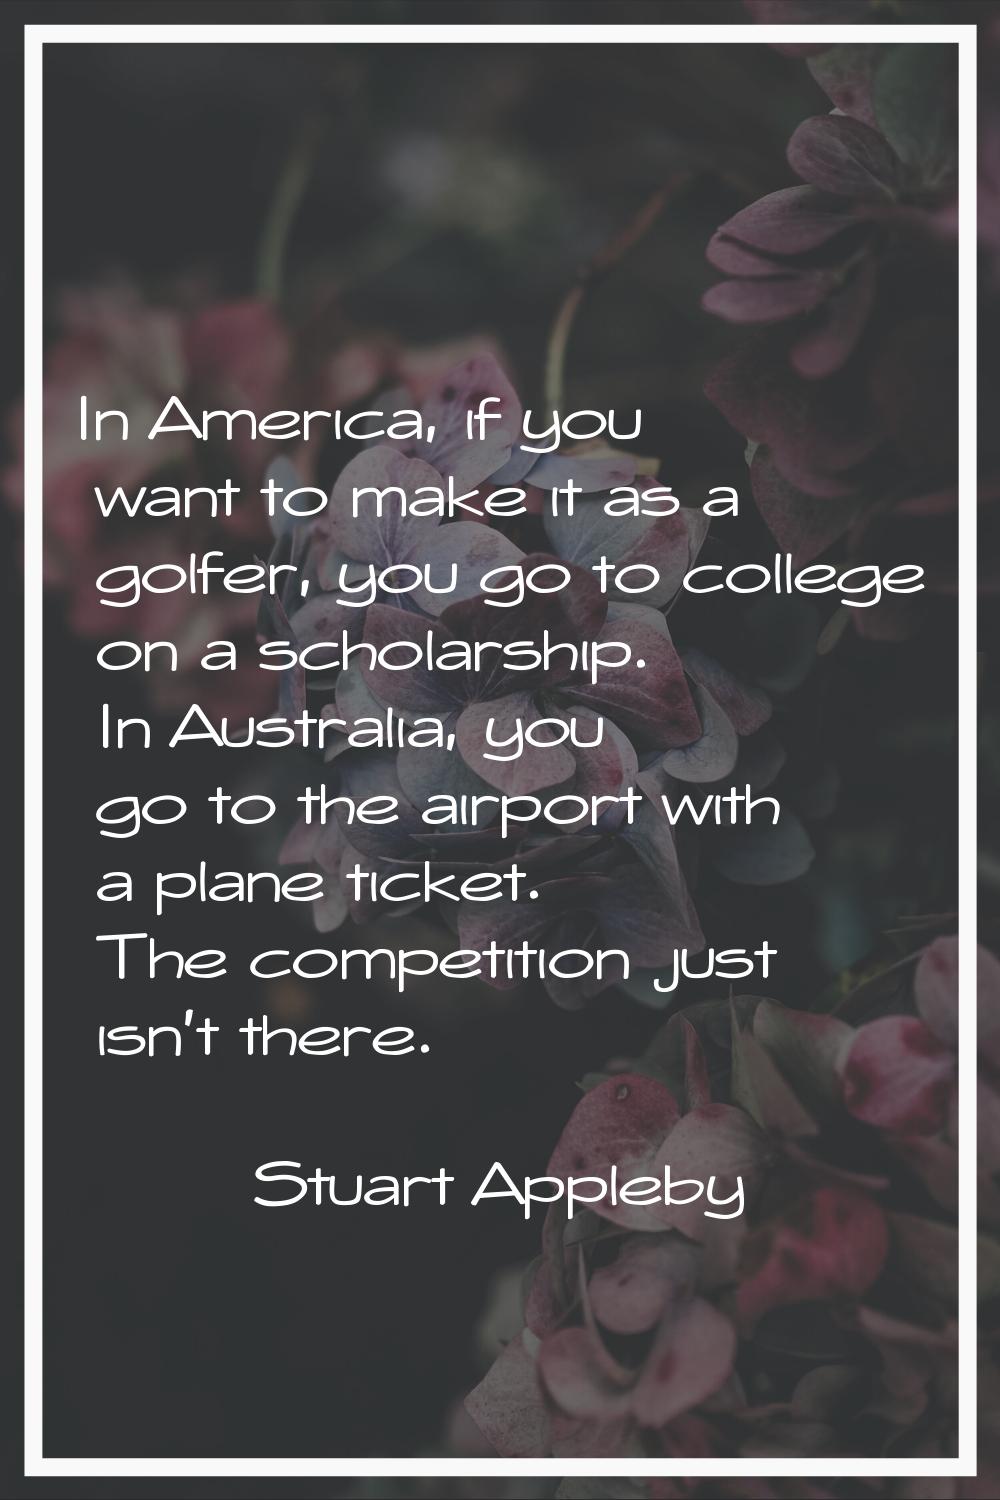 In America, if you want to make it as a golfer, you go to college on a scholarship. In Australia, y